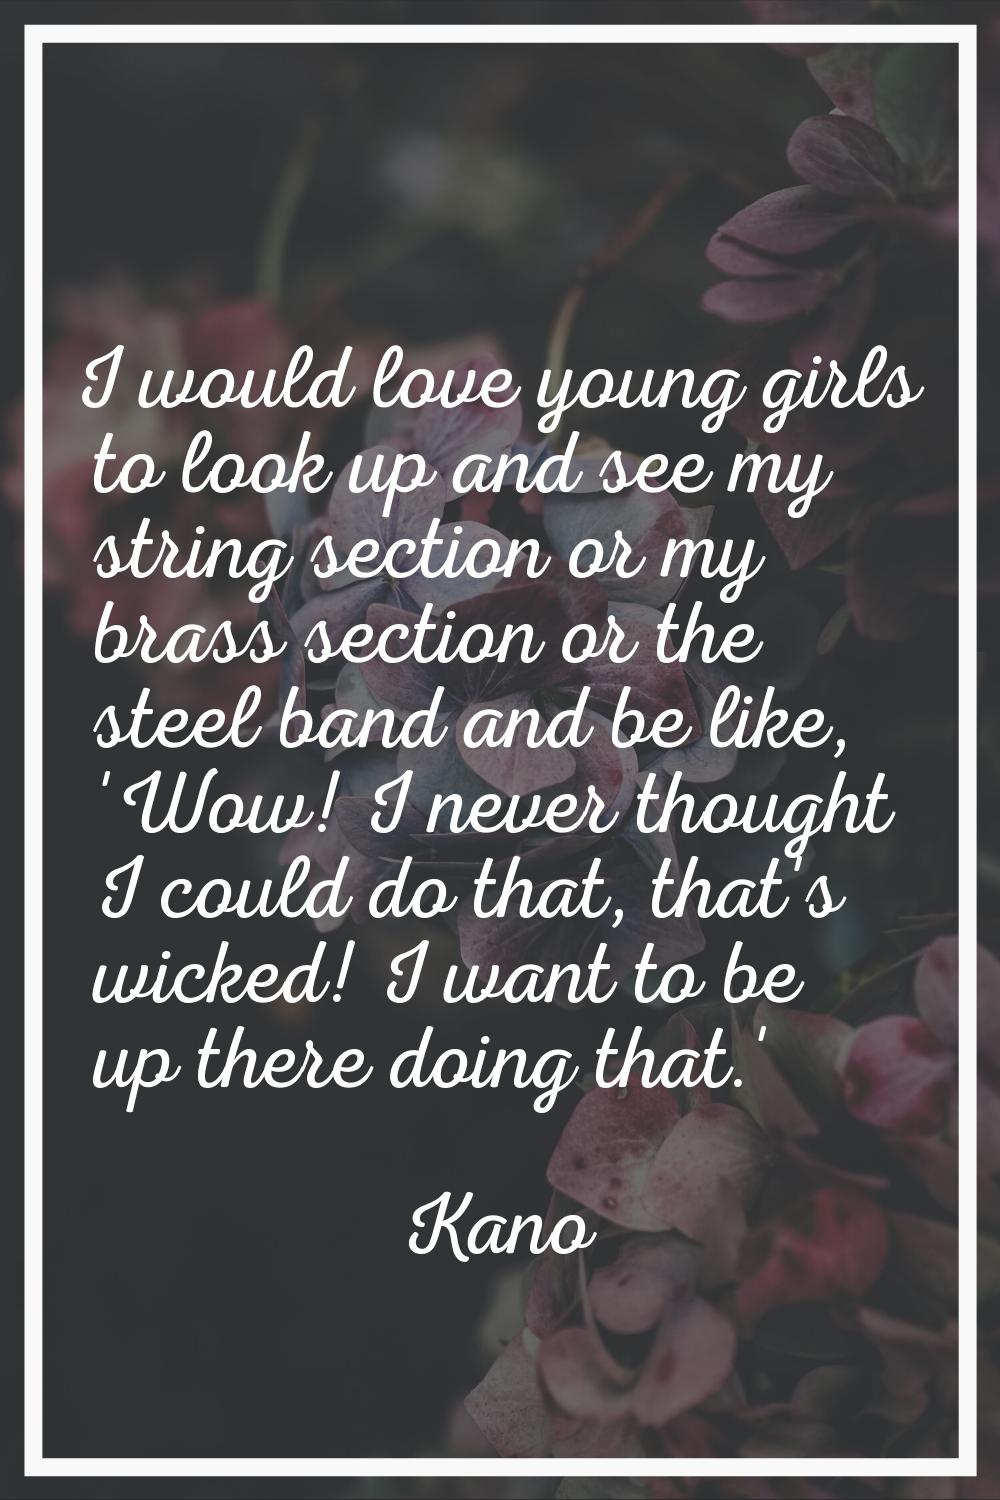 I would love young girls to look up and see my string section or my brass section or the steel band